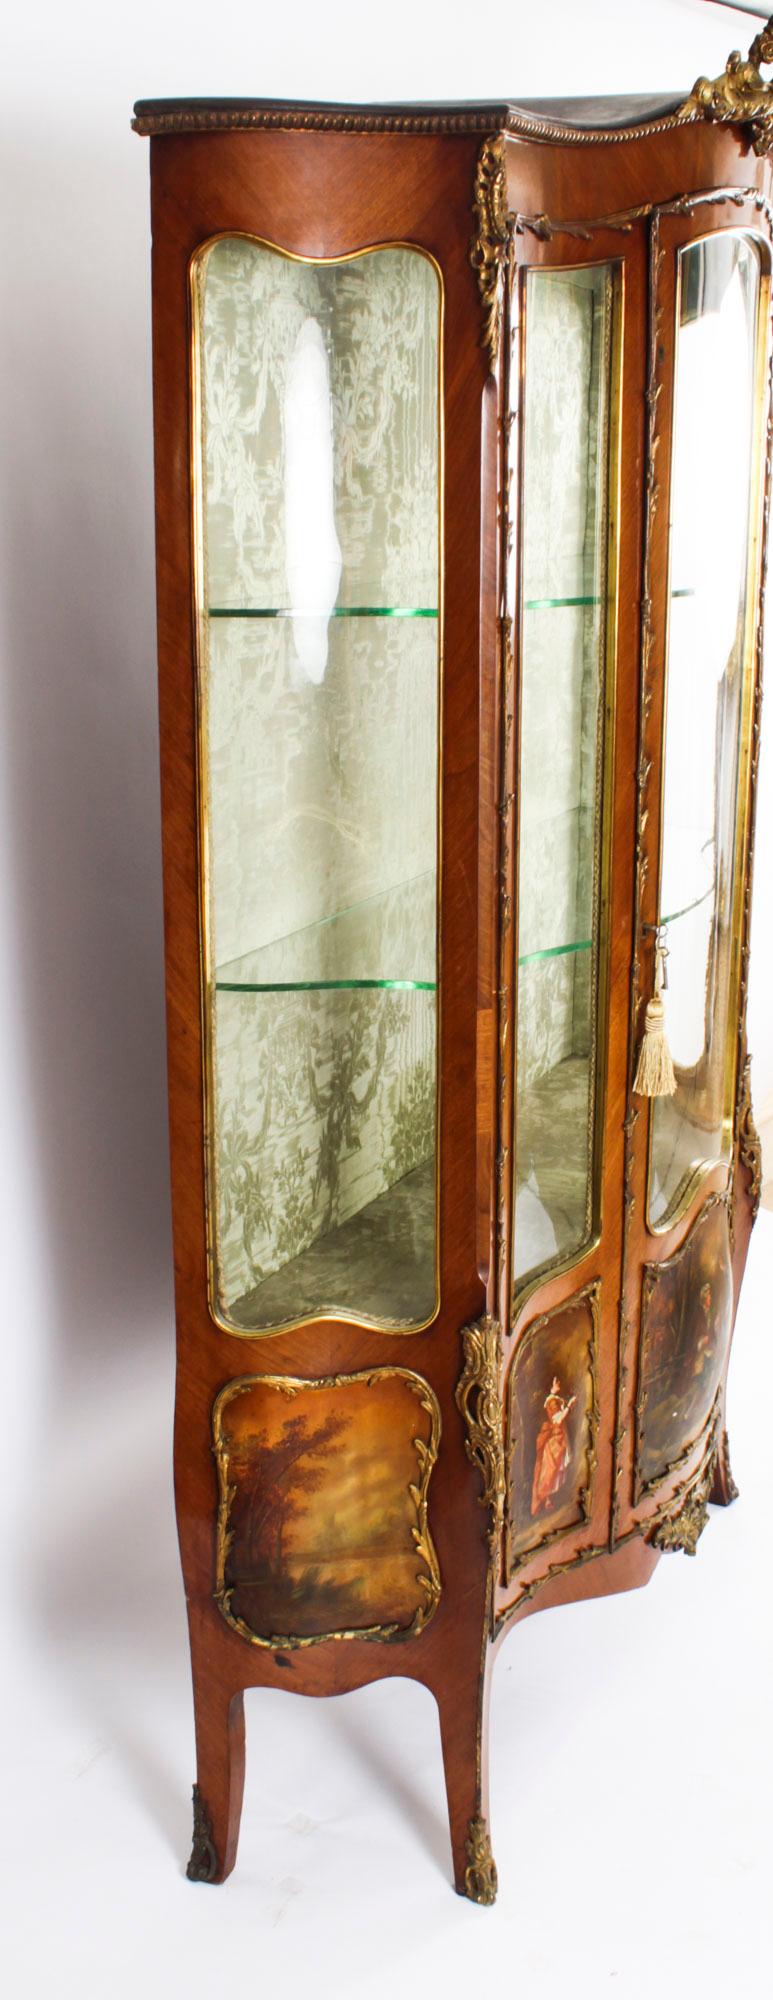 Antique Large French Vernis Martin Display Cabinet C1880 19th Century  For Sale 11